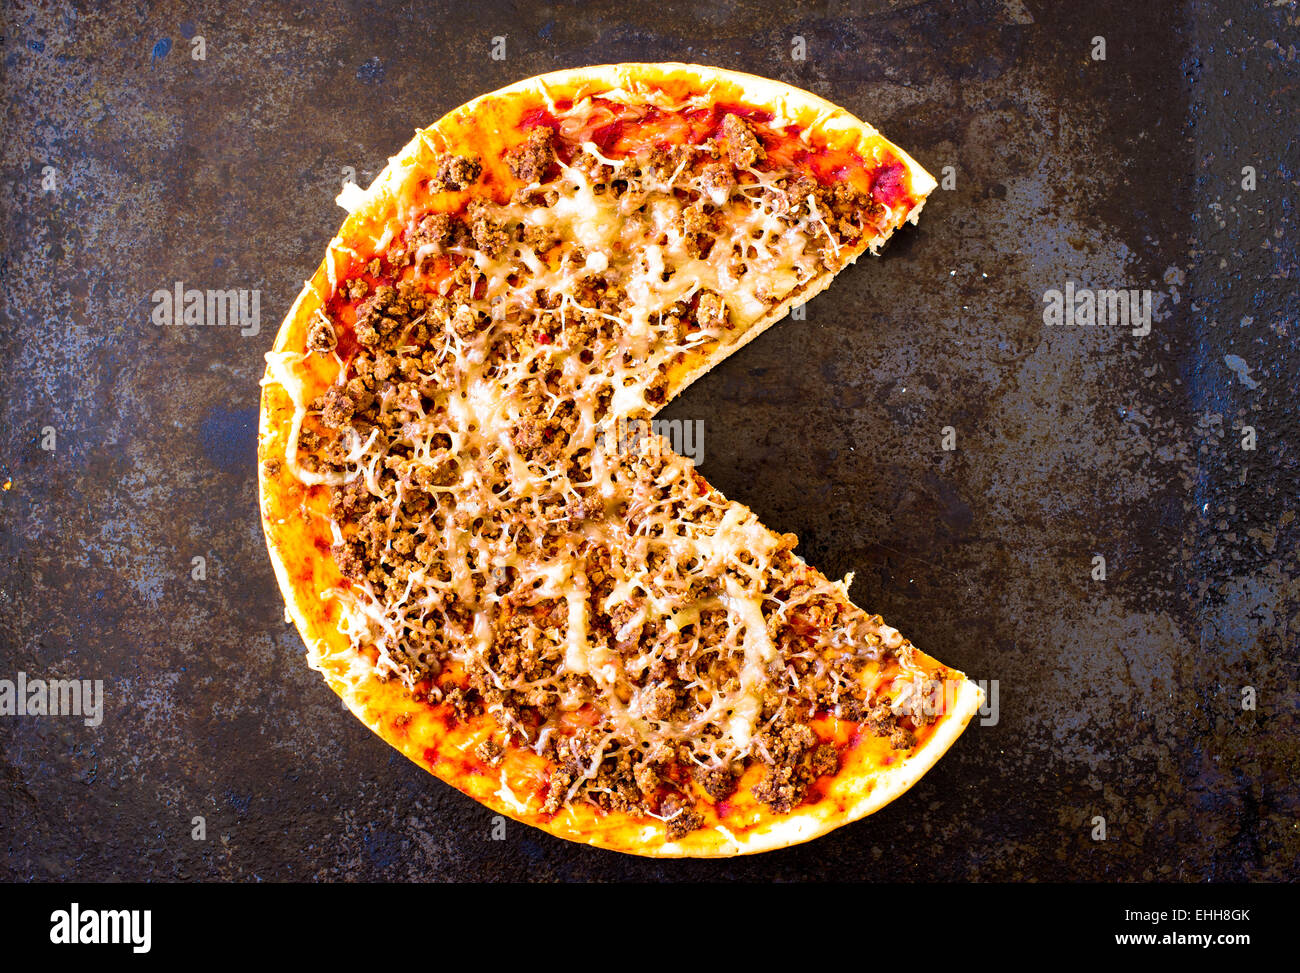 Pizza with minced meat and cheese on the stove top view Stock Photo